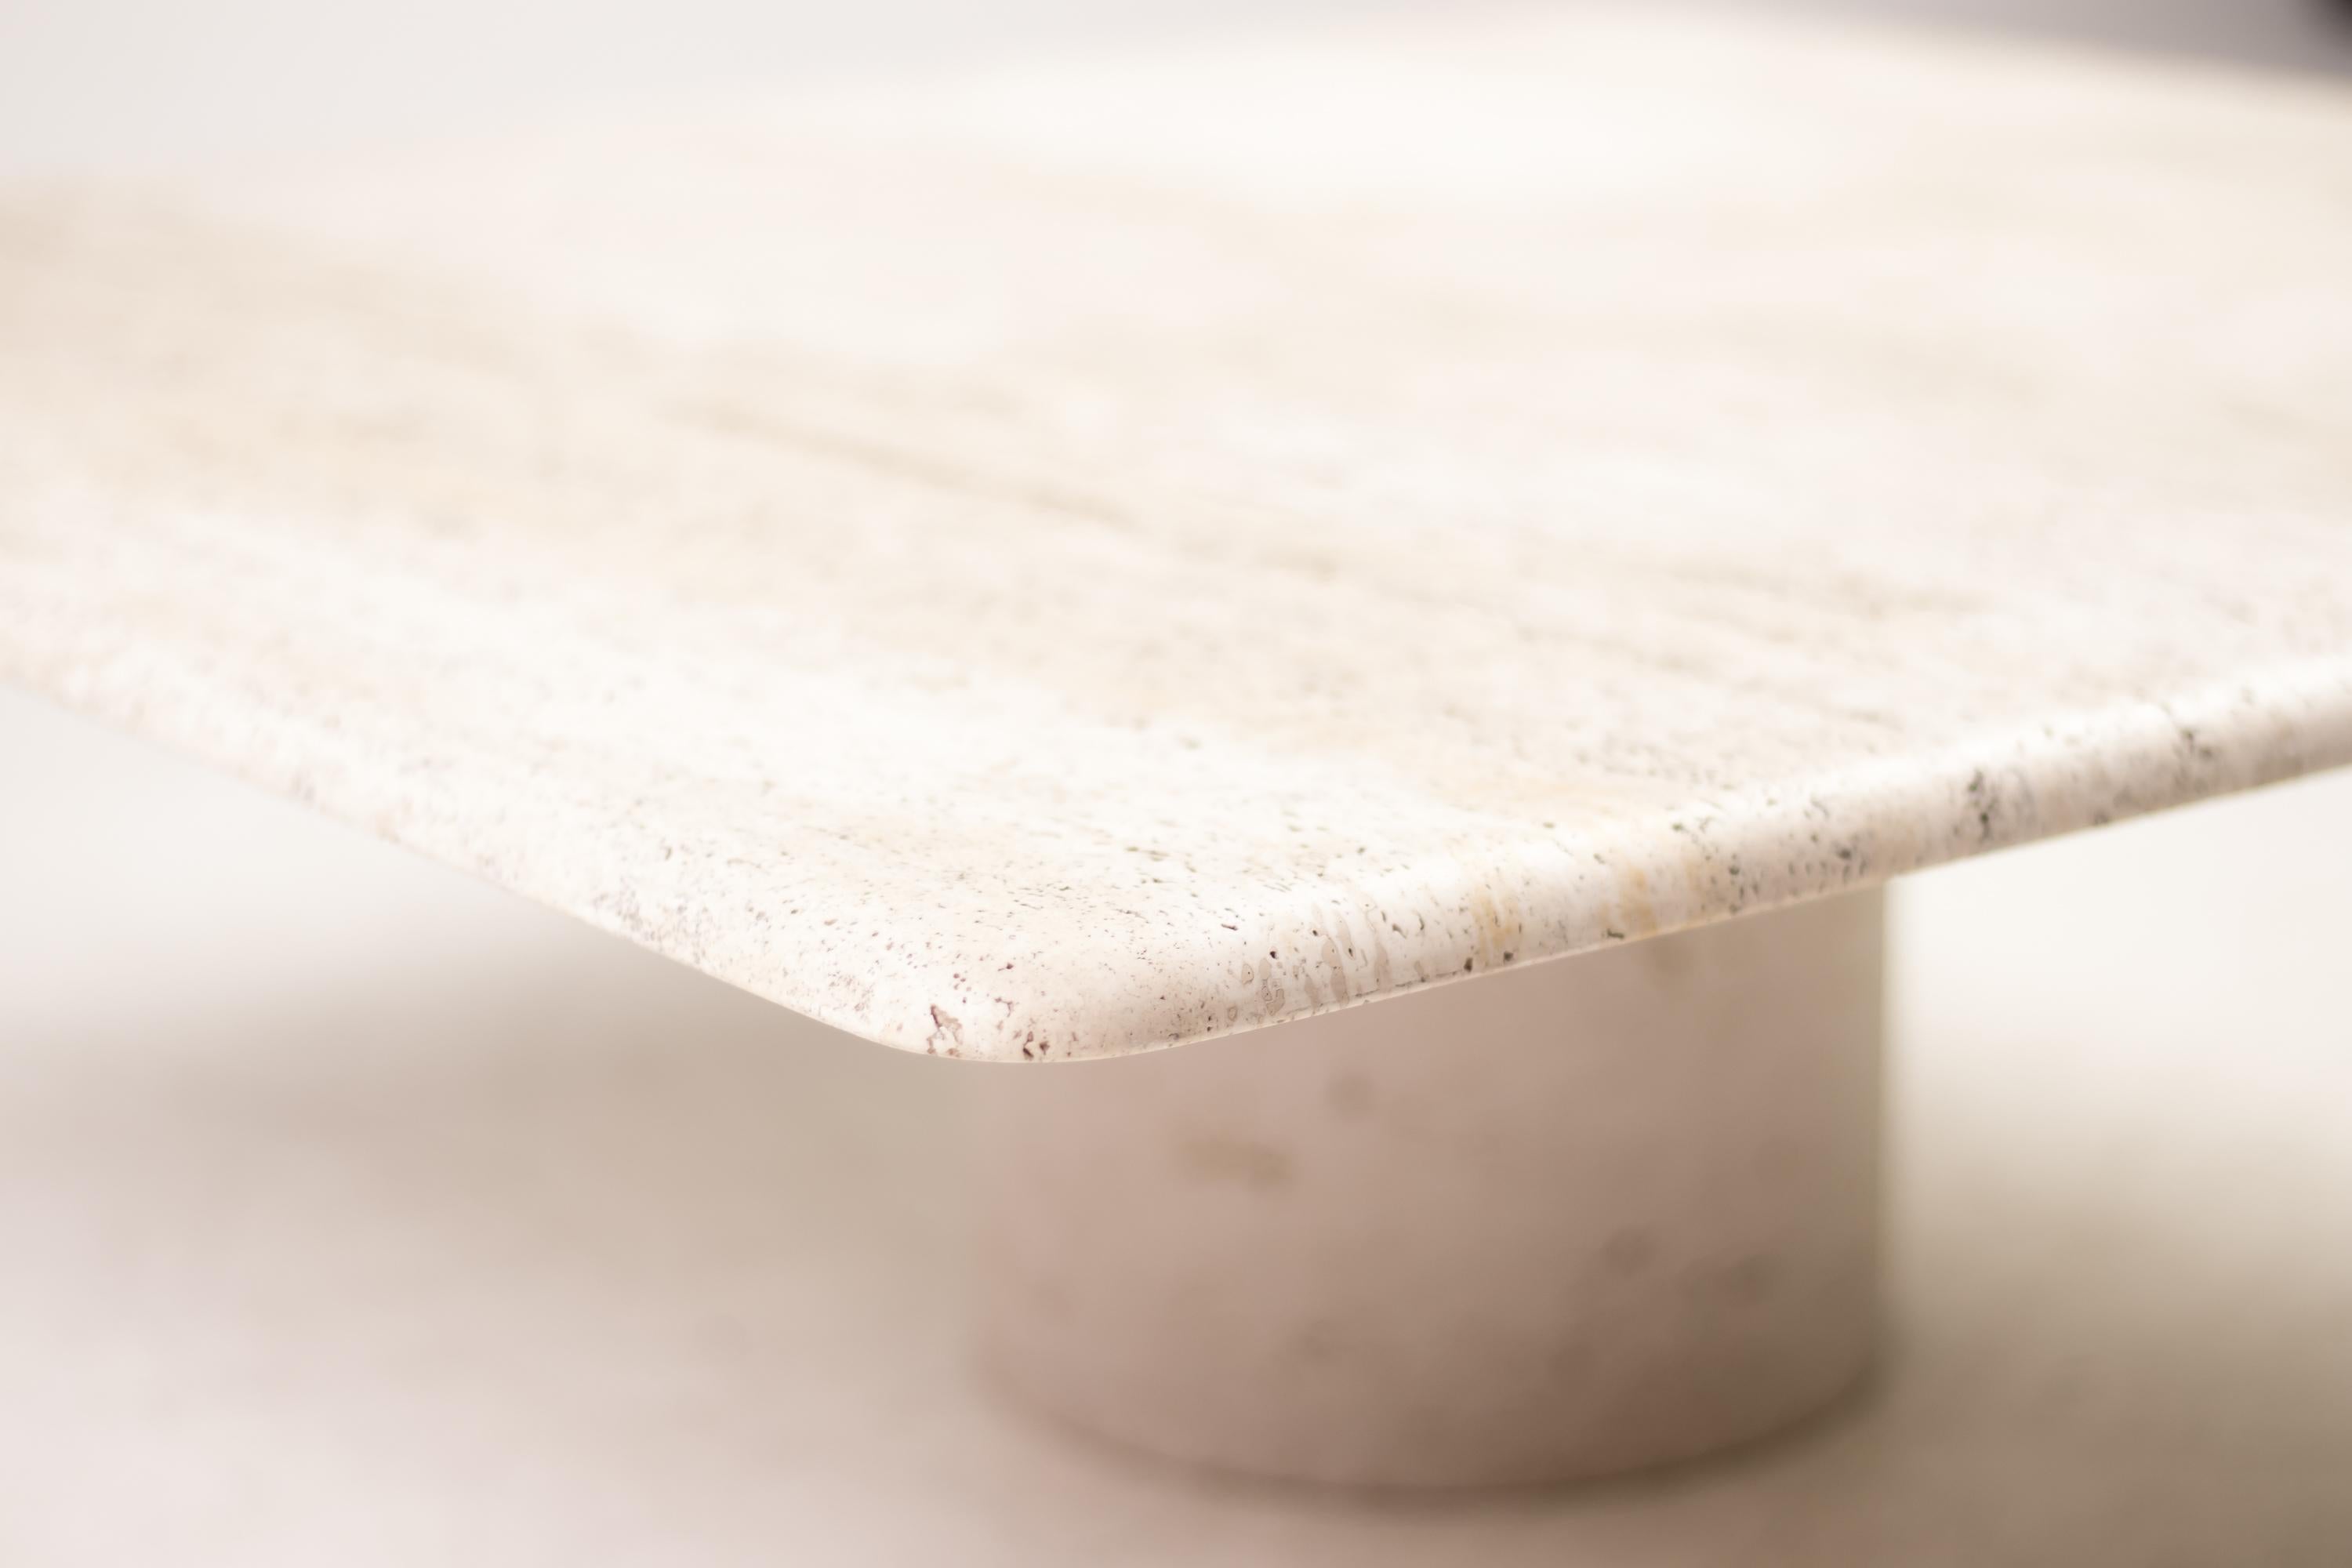 This architectural Up&Up travertine coffee table has a round travertine base that supports a top with trademark Mangiarotti bullnose edge. The travertine has a rich grain and the proportions are beautiful.